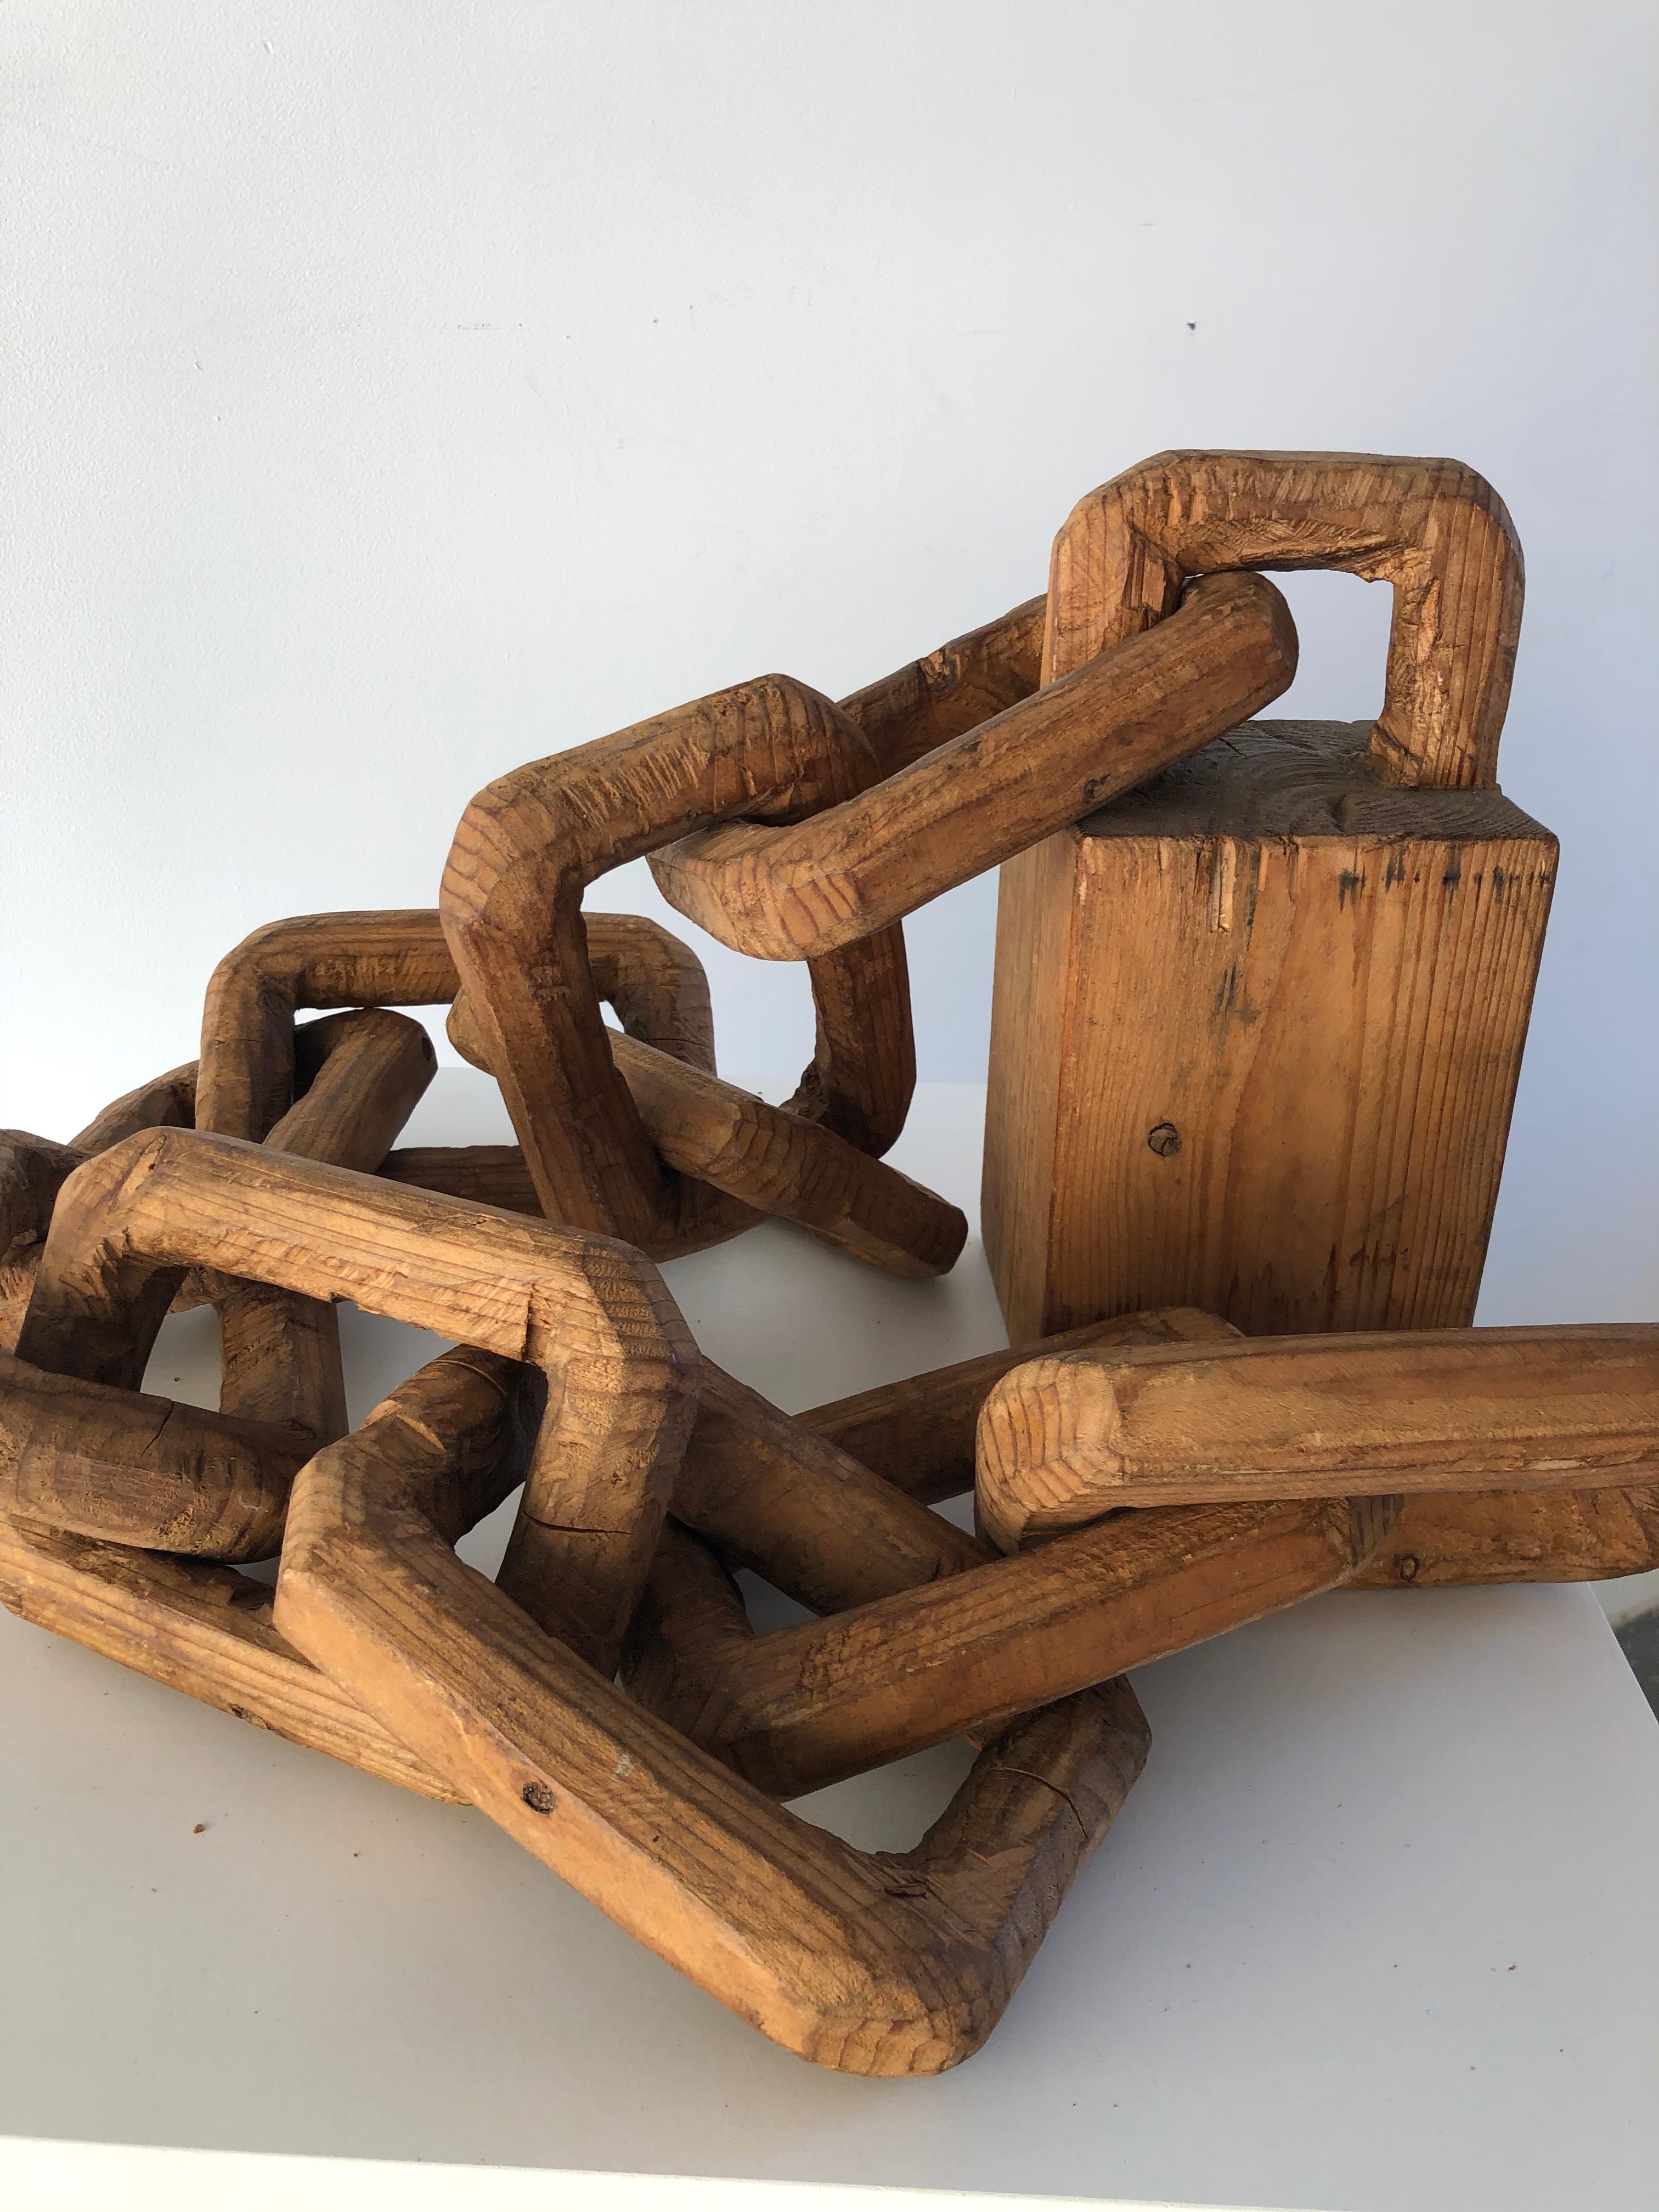 Sourced in Japan, estimated to come from early 20th century of hand carved wood connecting. each link and base. Elegant piece can lay on ground or on pedestal as shown.